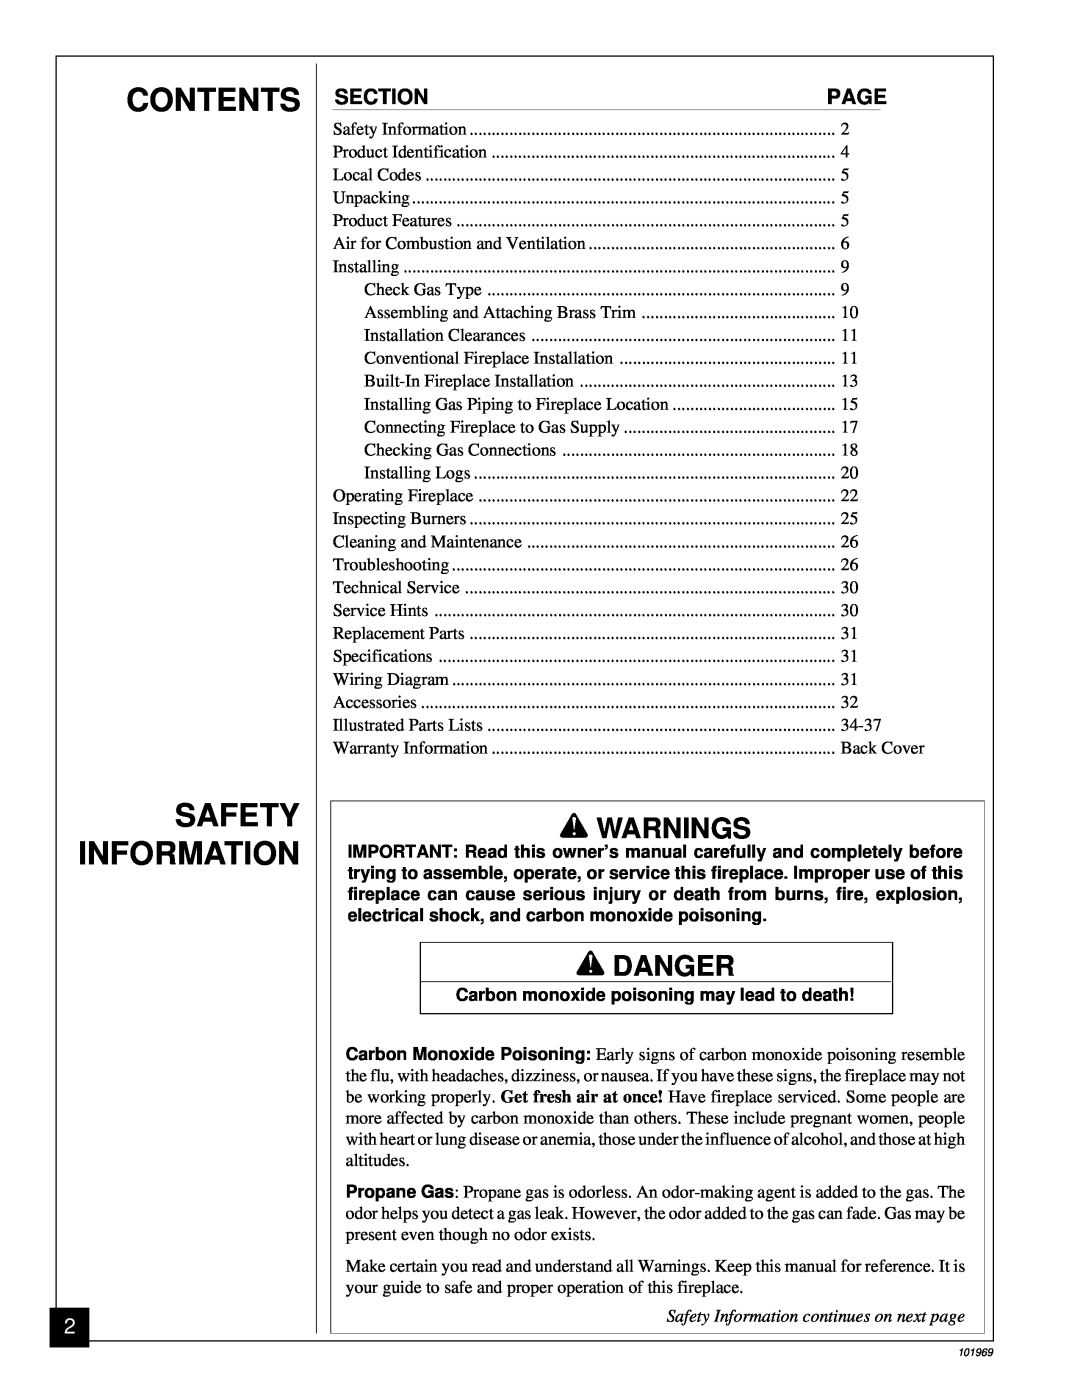 Desa UNVENTED (VENT-FREE) PROPANE GAS FIREPLACE installation manual Contents Safety Information, Warnings, Danger 